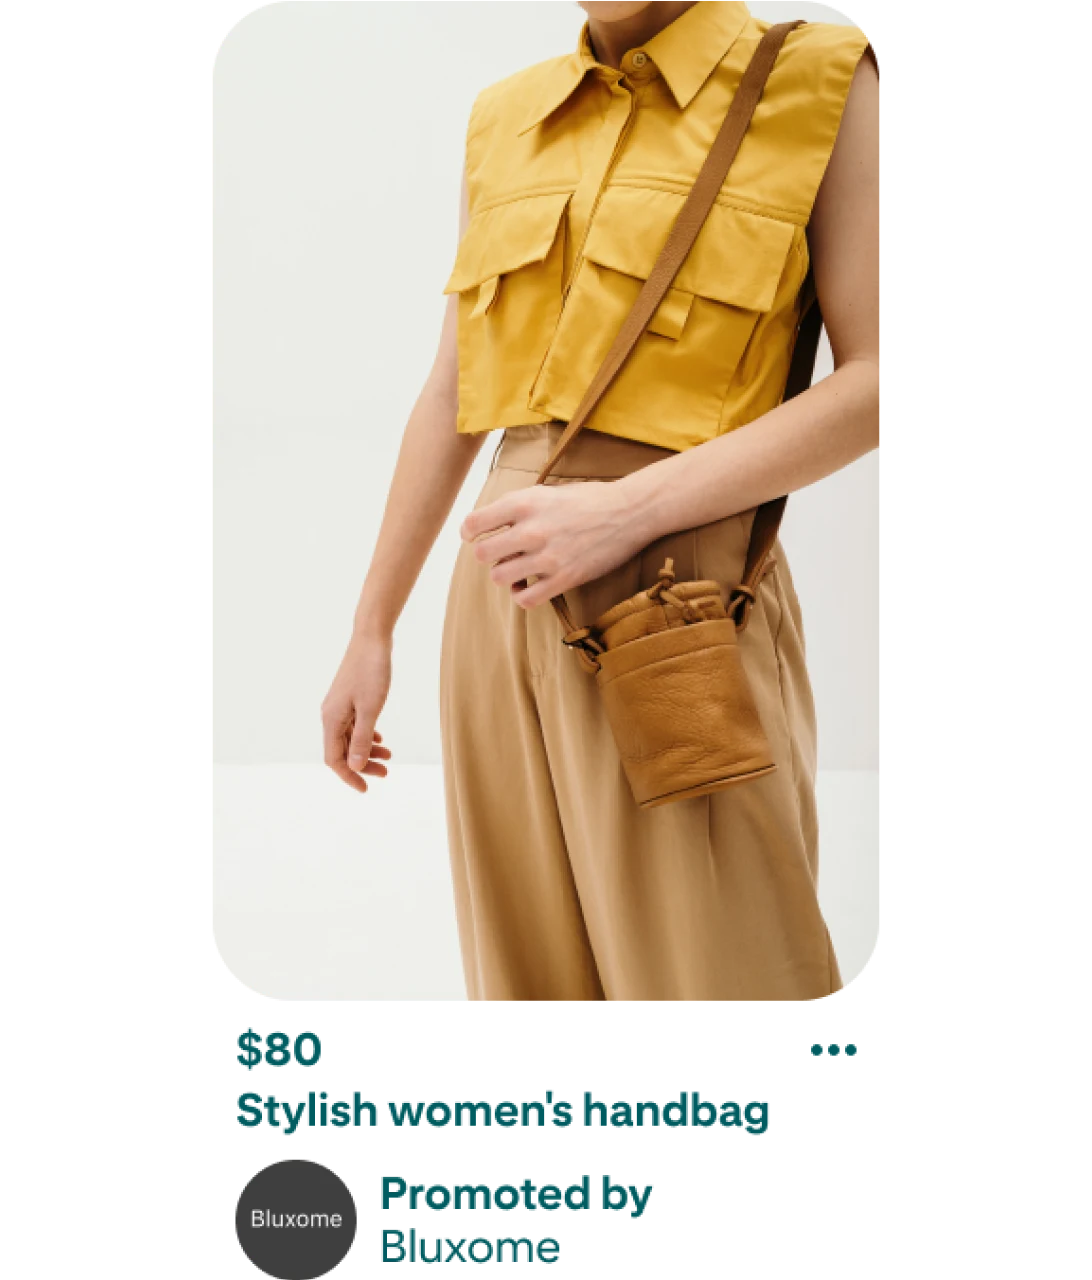 Image of a pin selling a women's handbag. The pin displaysa person wearing a tan handbag. The handbag has a long strap and is drapped over their shoulder. Person in the image is wearing a collared, sleeveless yellow shirt with tapered khaki pants. Below the image of the person, the cost and description of the handbag is listed. The listed price is $80 and the description reads: "Stylish women's handbag, promoted by Bluxome." 